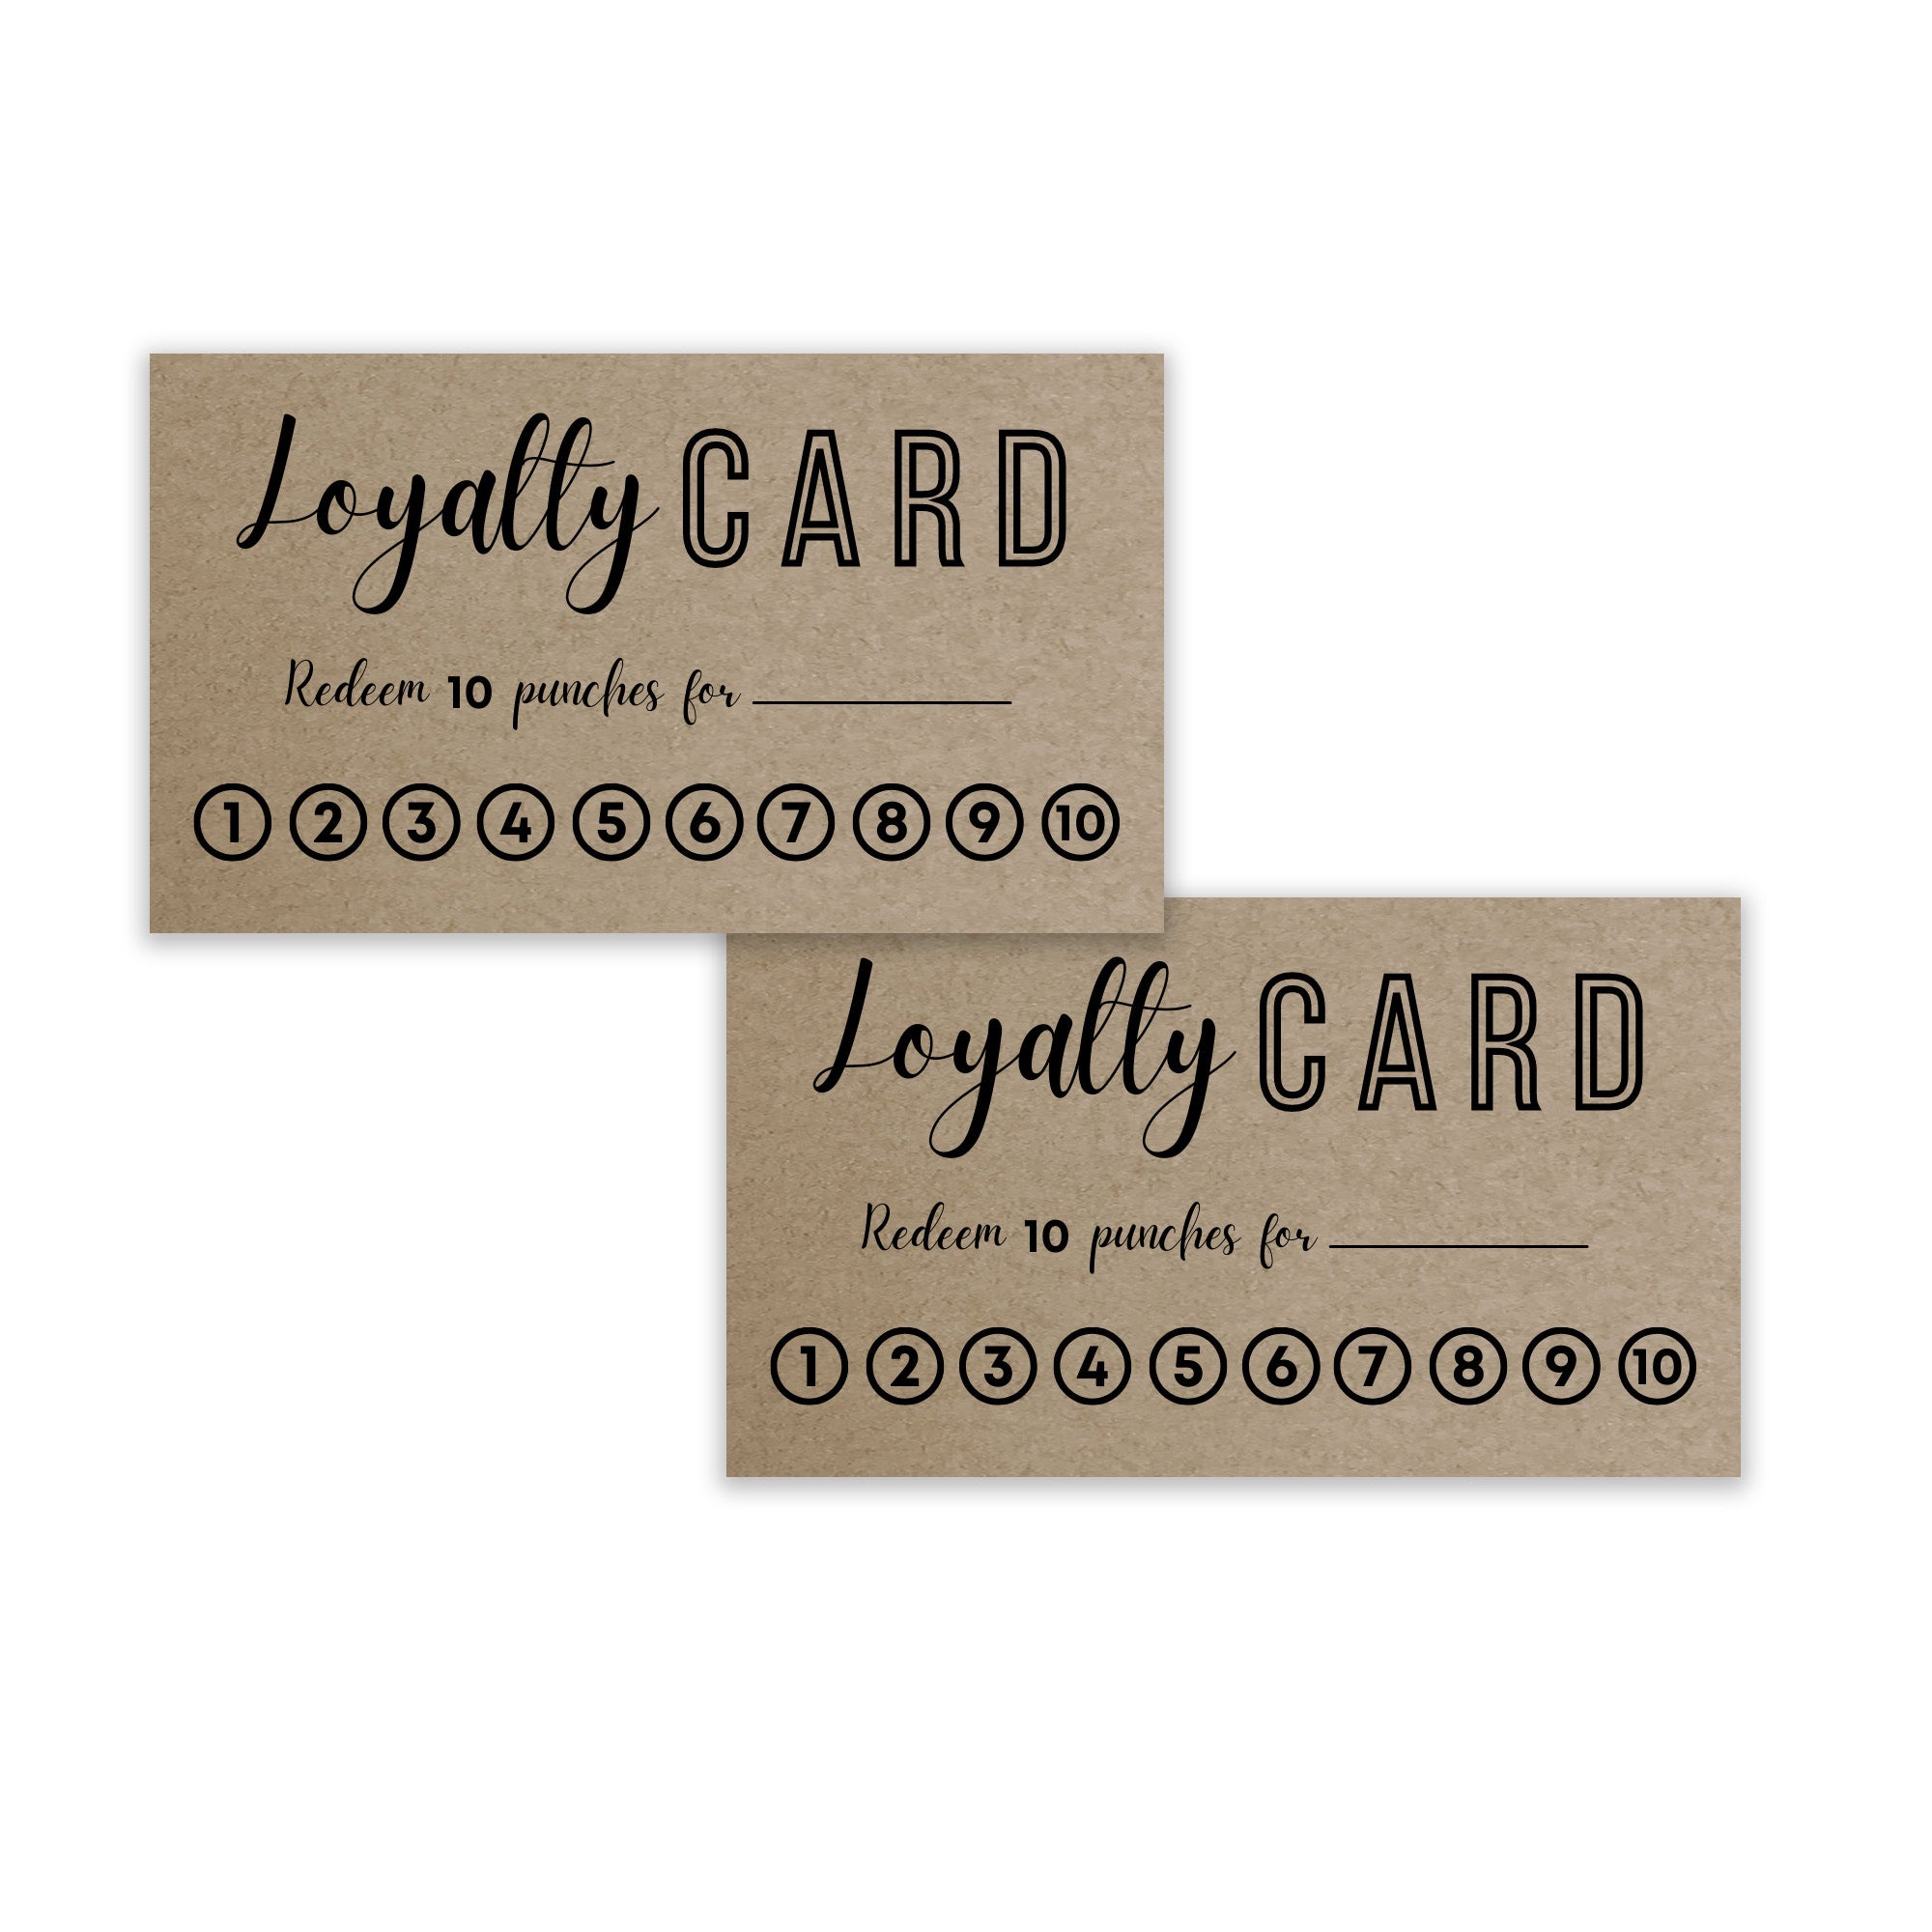 Pre-Printed Business card size Punch-Loyalty cards for small